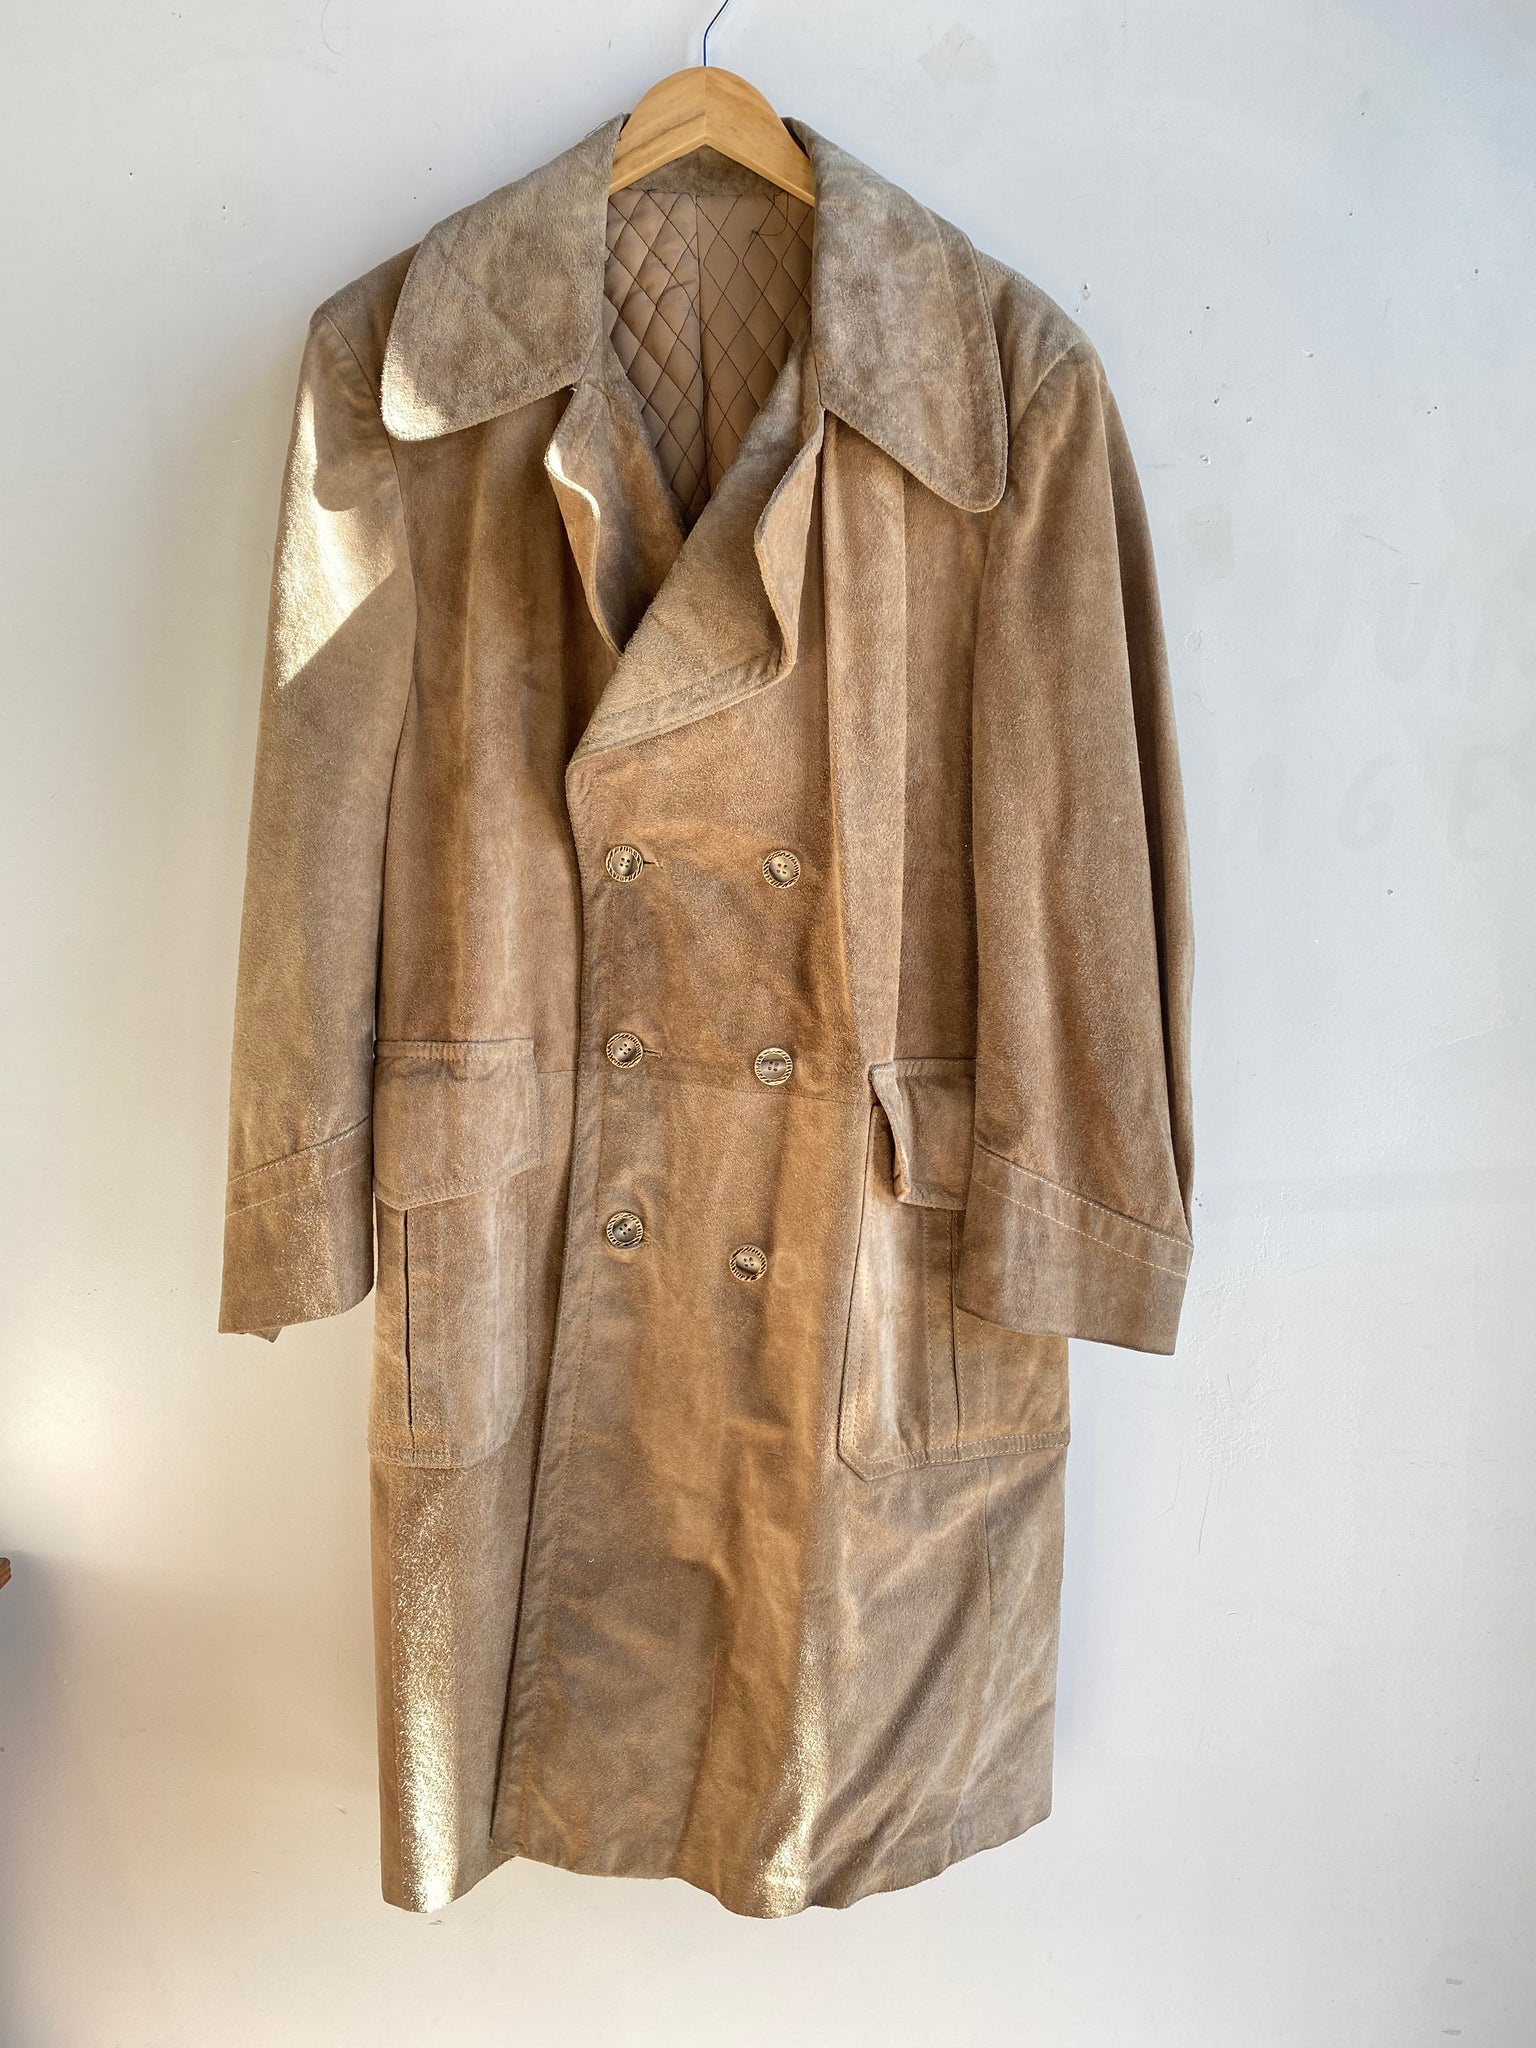 70s Tan Suede Leather Trench Coat